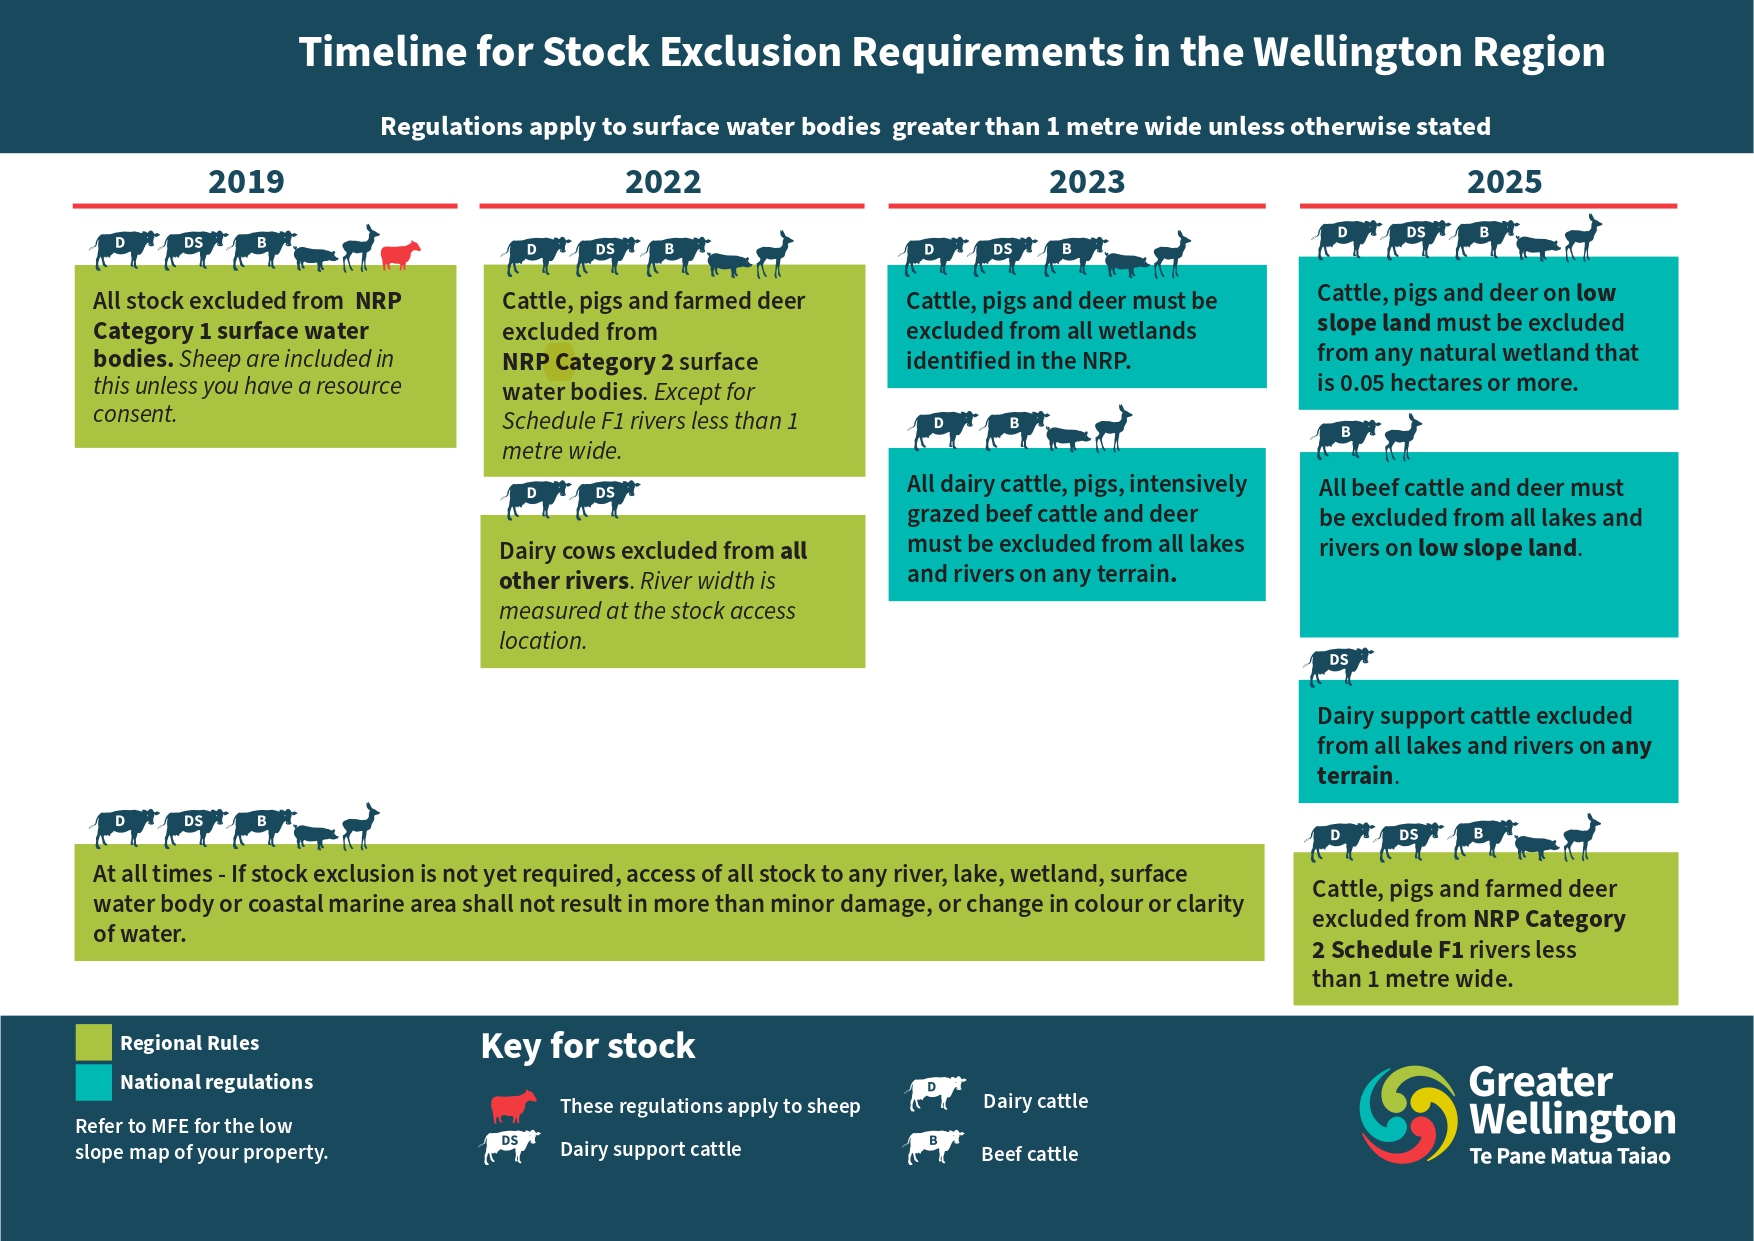 Timeline for stock exclusion requirements in the Wellington Region